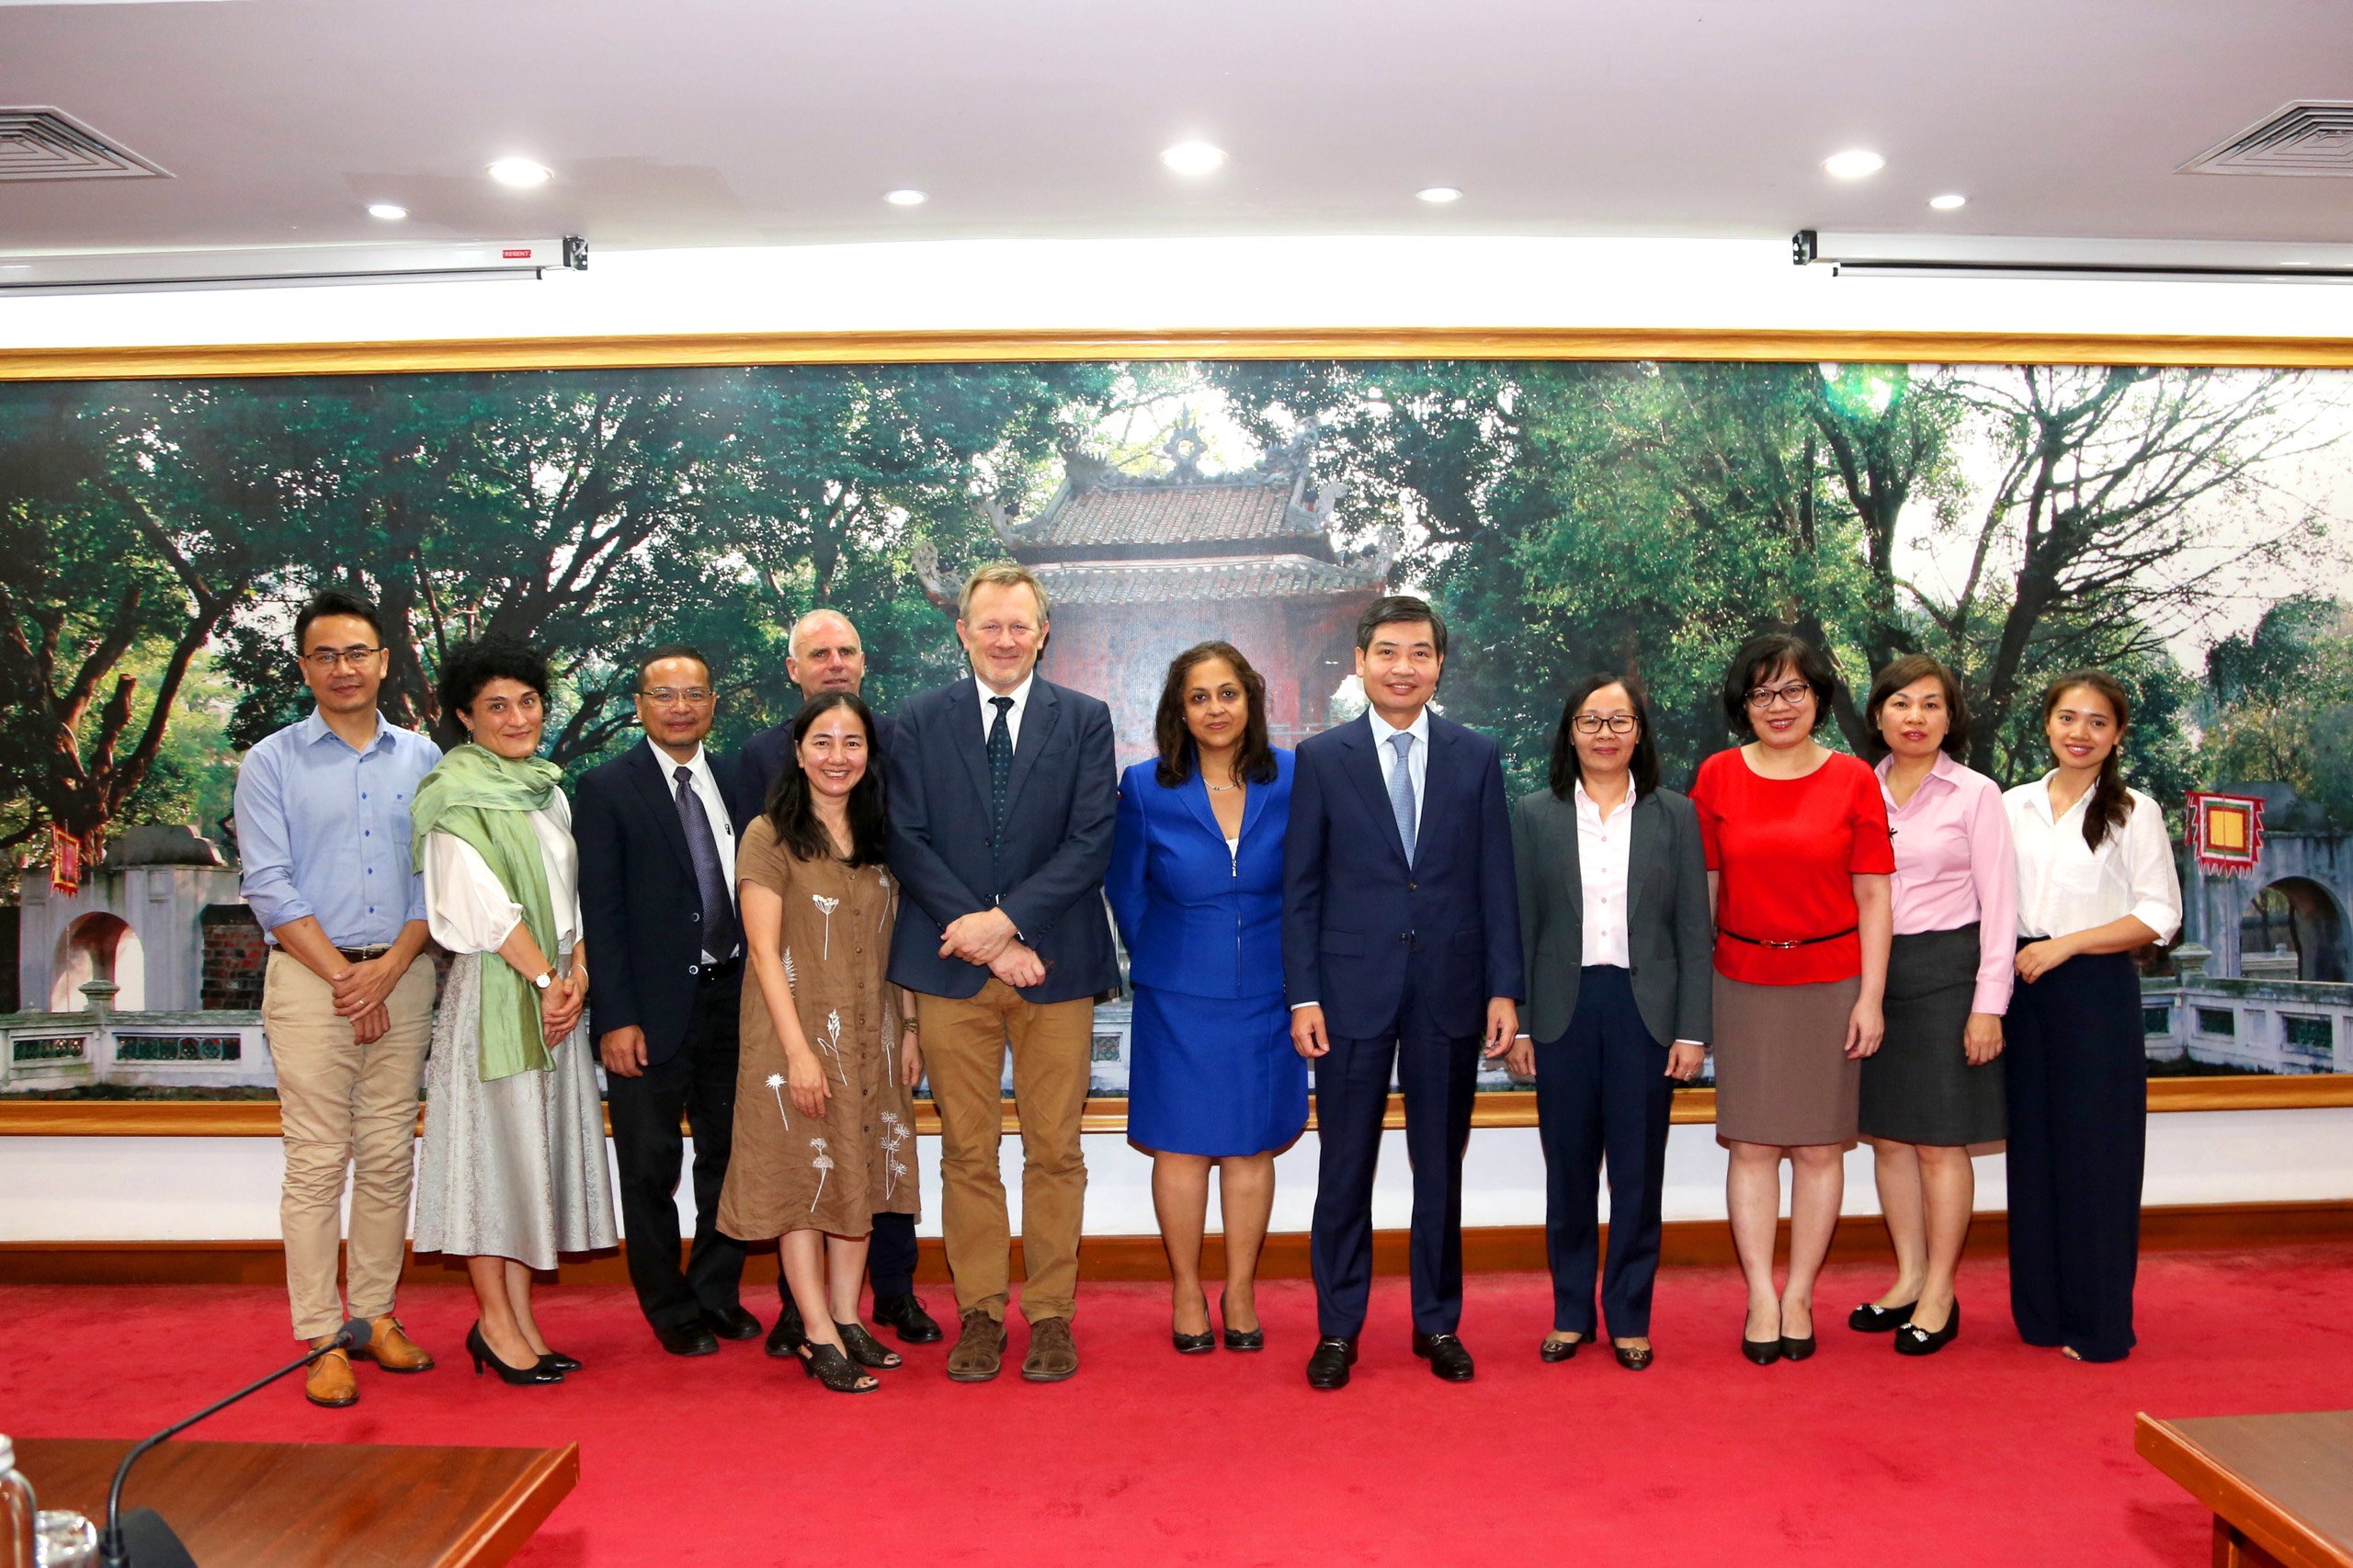 Reehana R. Raza (C) poses for a picture with UN development partners and Vietnamese officials on her first official visit to Vietnam this week as the new regional director at the International Fund for Agricultural Development (IFAD) in Asia-Pacific.